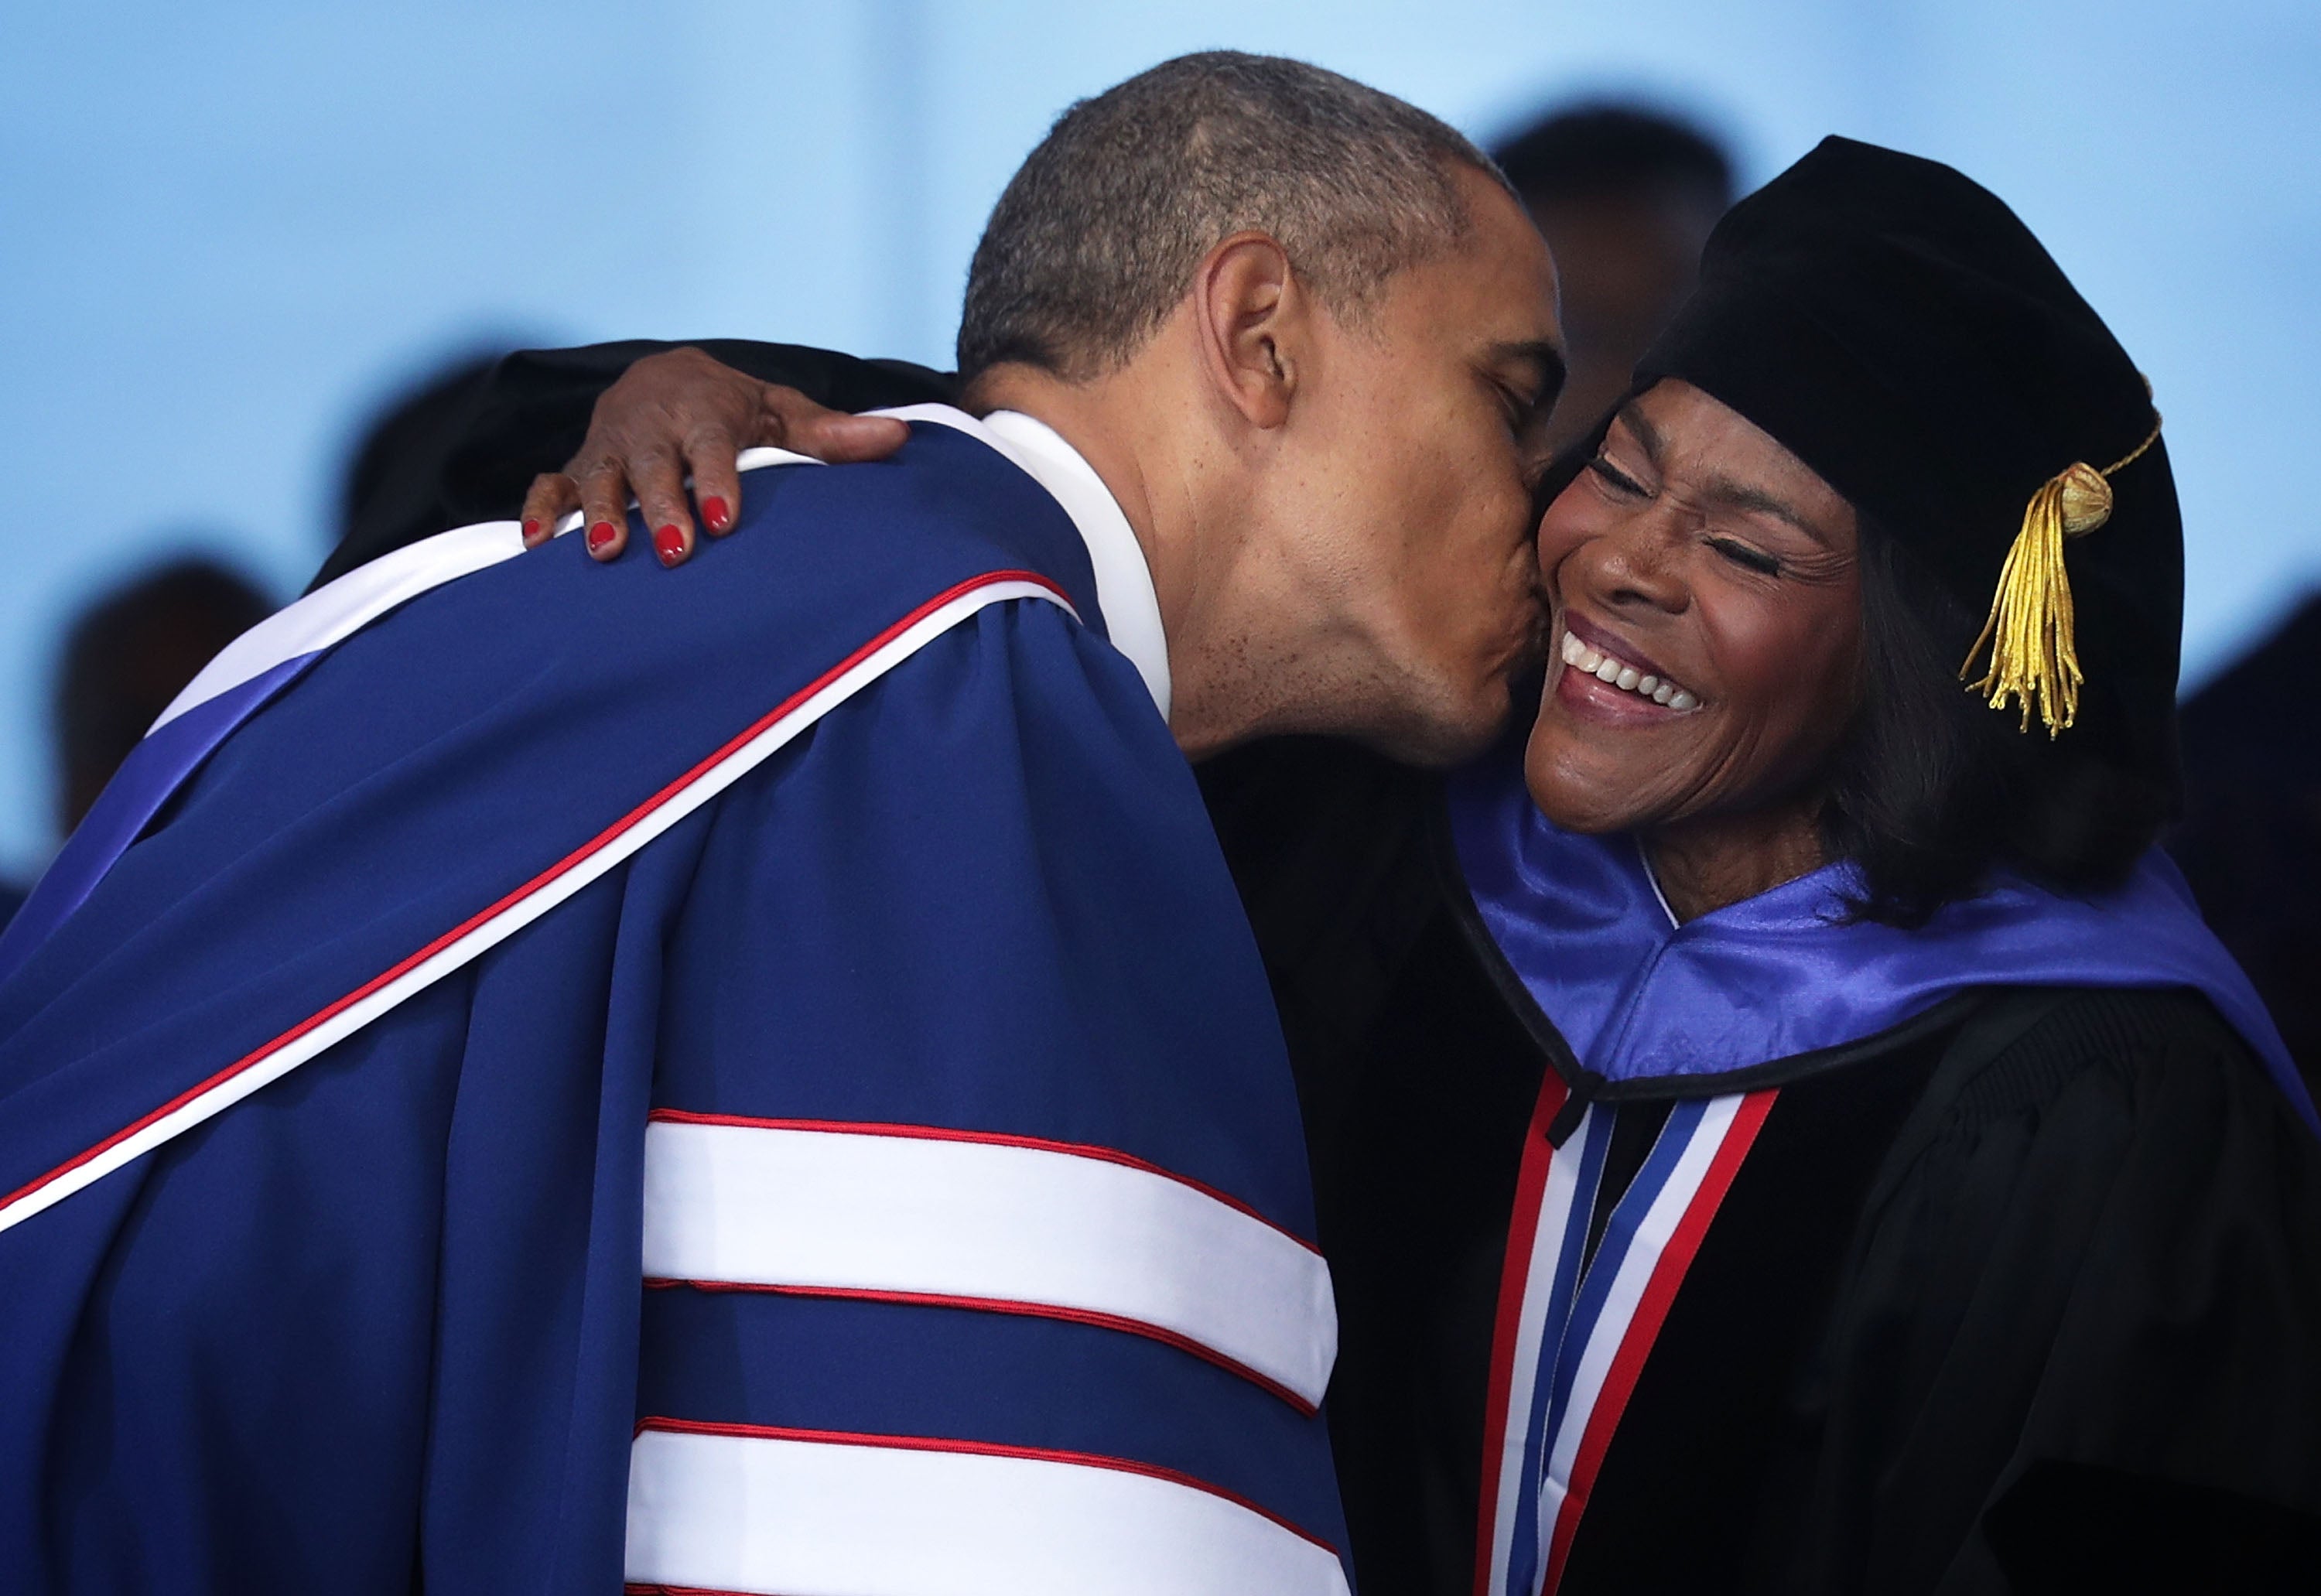 President Obama & Cicely Tyson Deliver Awe-Inspiring Speeches at the Howard University Graduation, 'Be Confident In Your Blackness'
